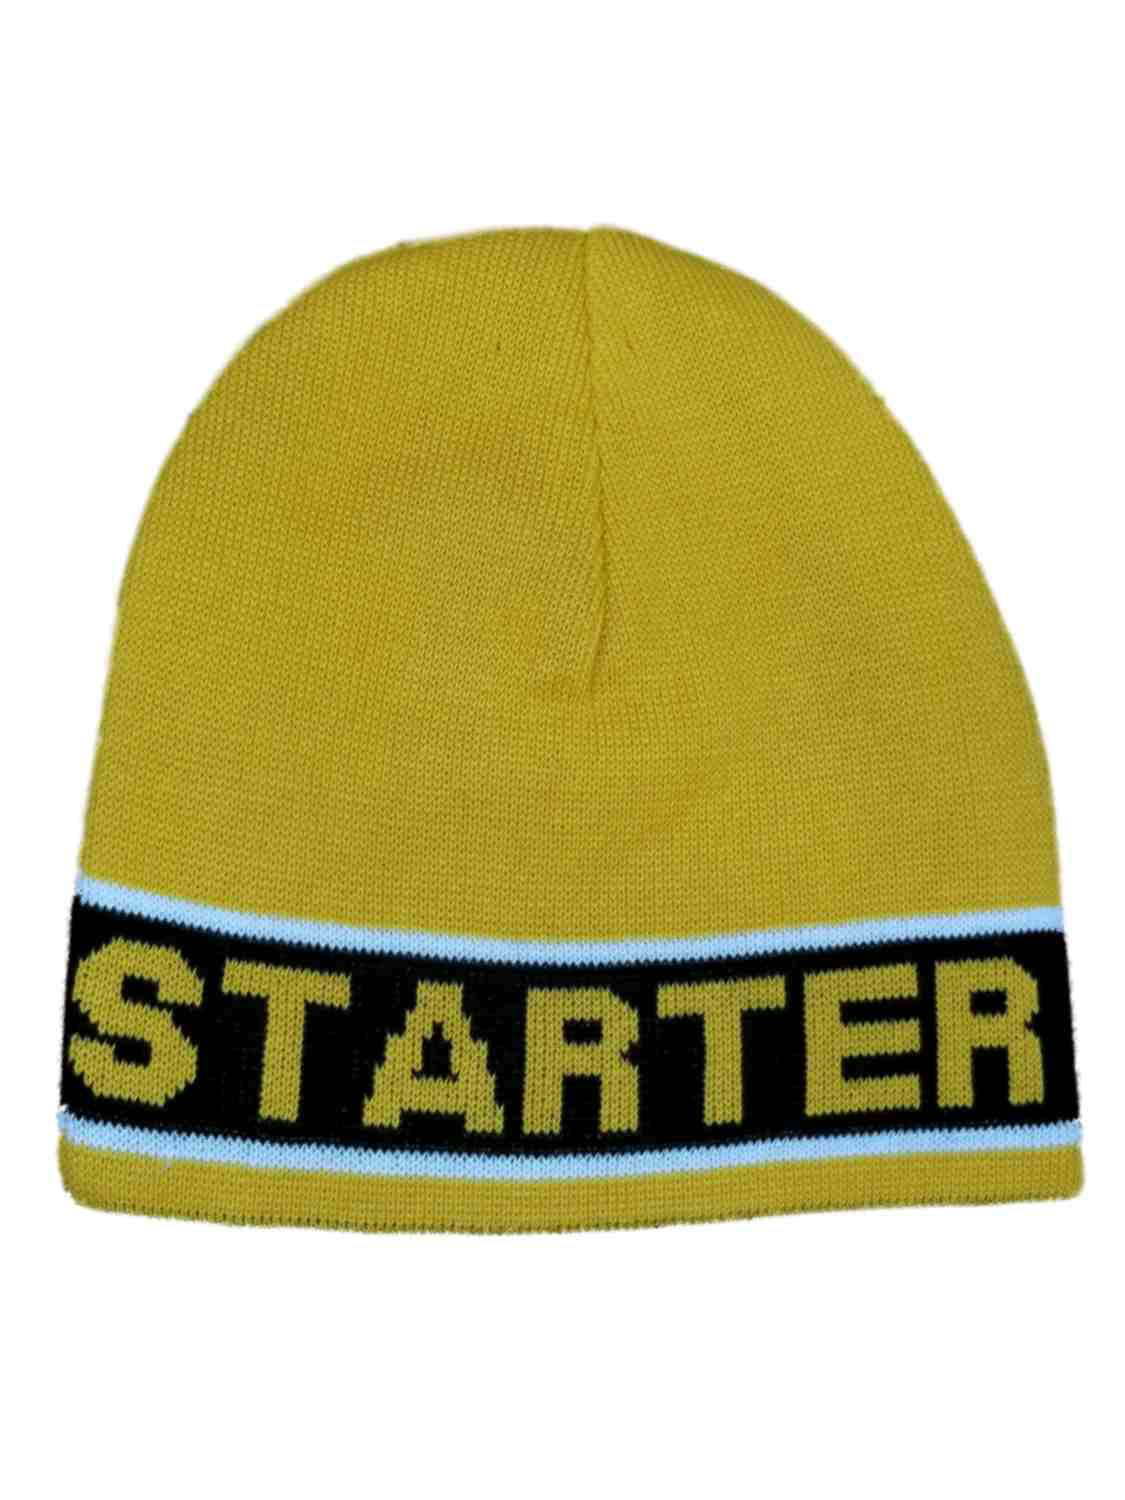 speck knit beanie mens hat yellow